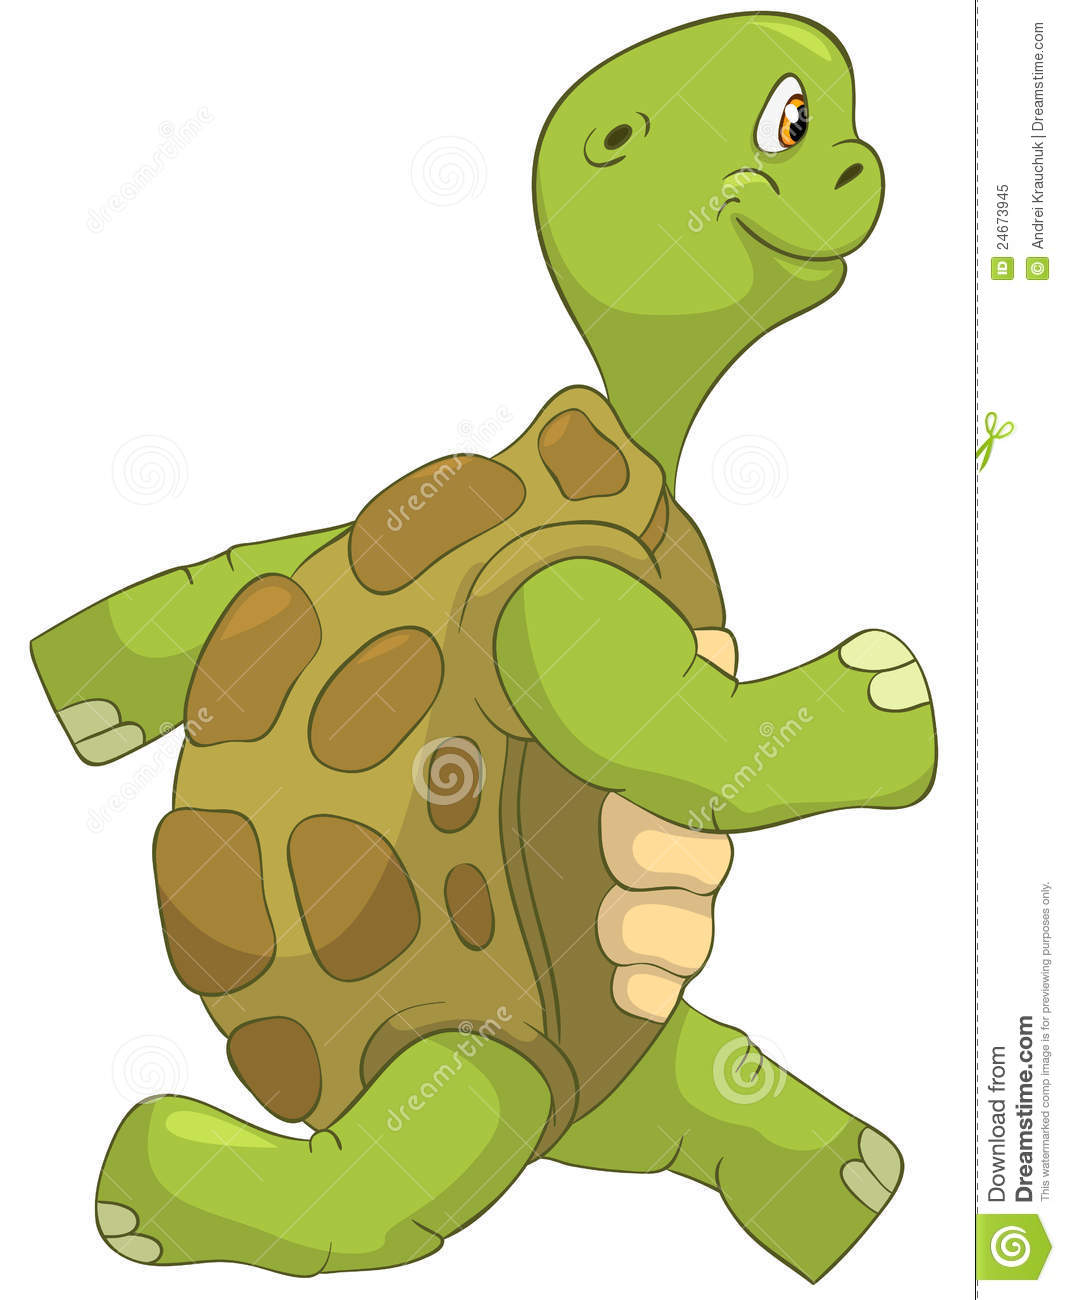 Funny Turtle  Running  Royalty Free Stock Photo   Image  24673945